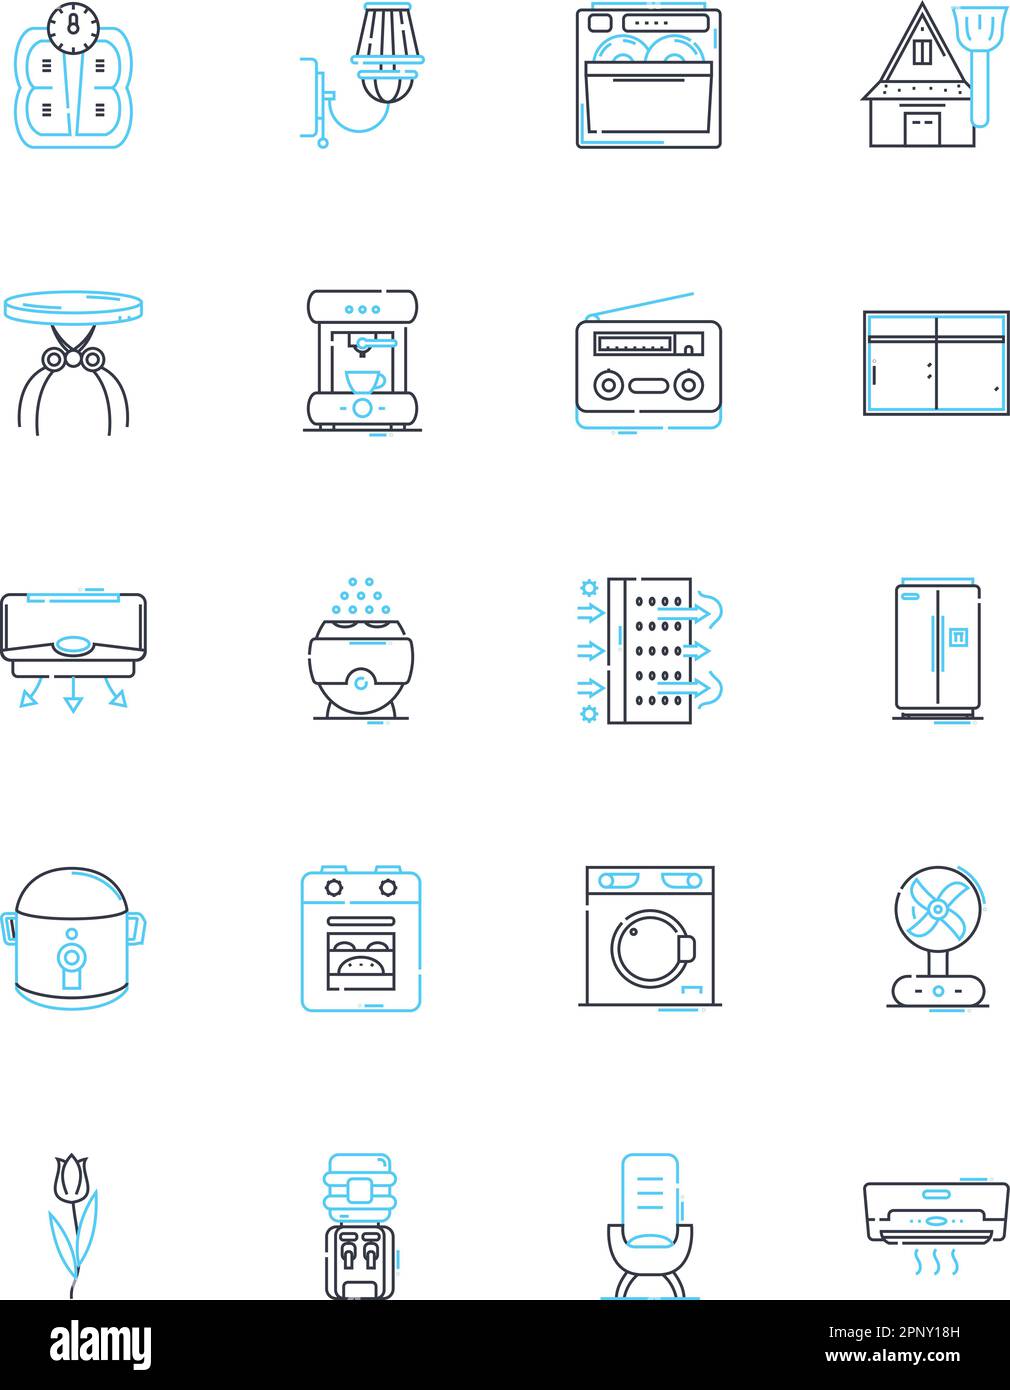 Dishwasher linear icons set. Cleaning, Efficiency, Sanitation, Dishware, Hygiene, Automatic, Rinse line vector and concept signs. Steam,Drying,Wash Stock Vector